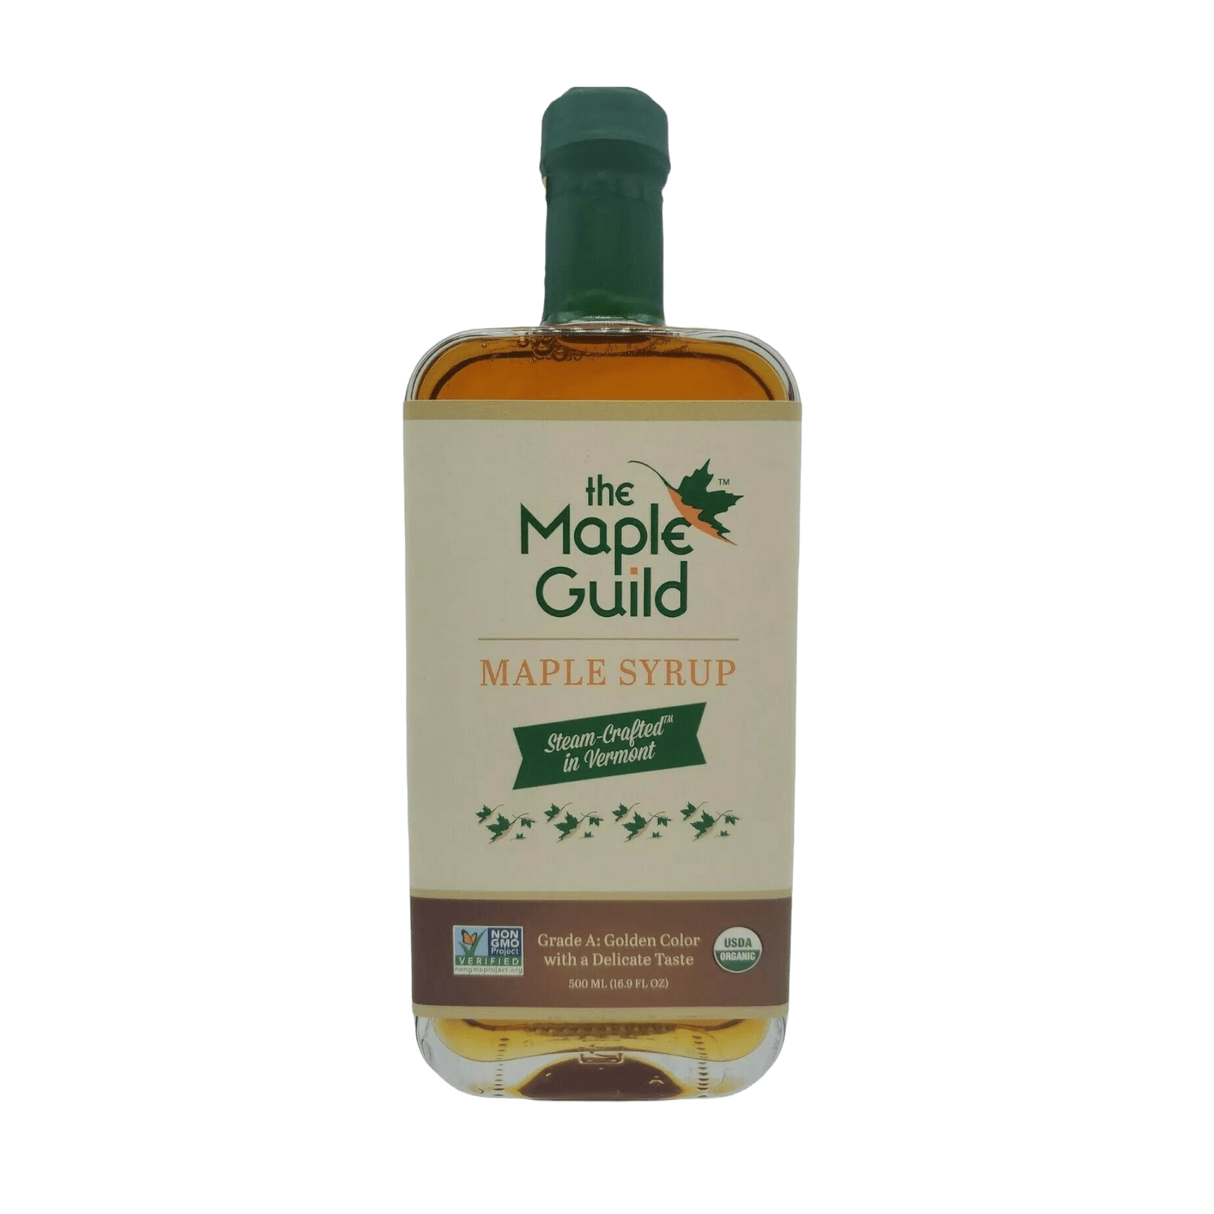 The Maple Guild Maple Syrup Steam-Crafted in Vermont